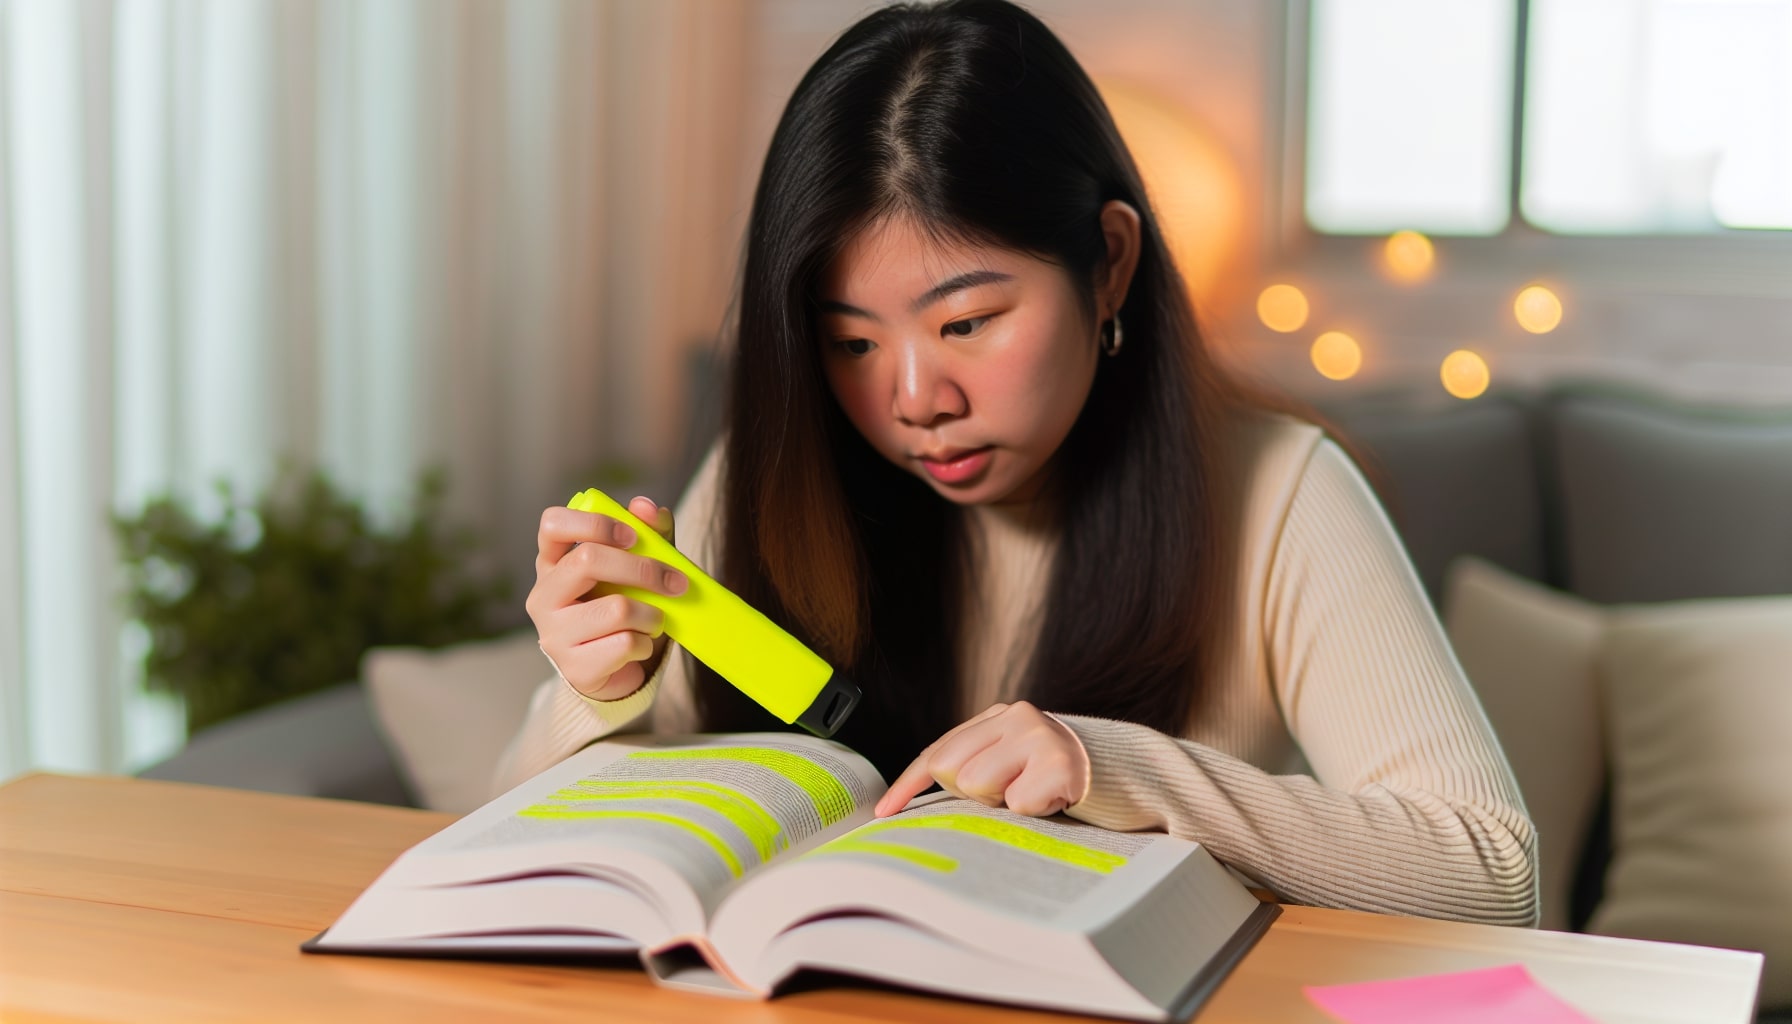 Person actively annotating and highlighting key points in a book